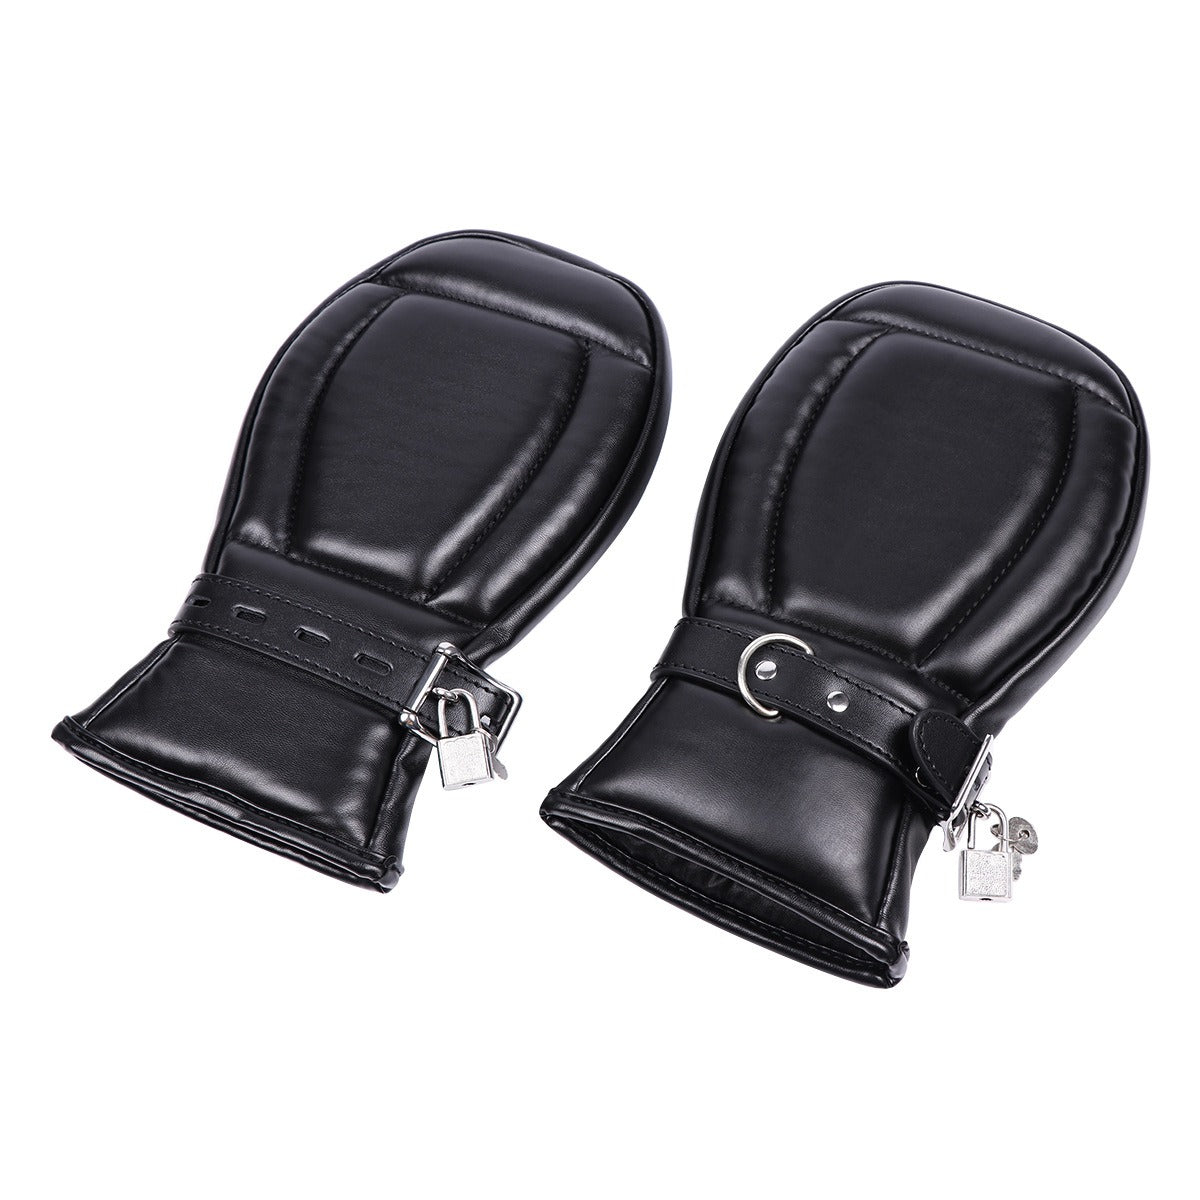 PADDED PUP PAW LOCKABLE MITTS - Black